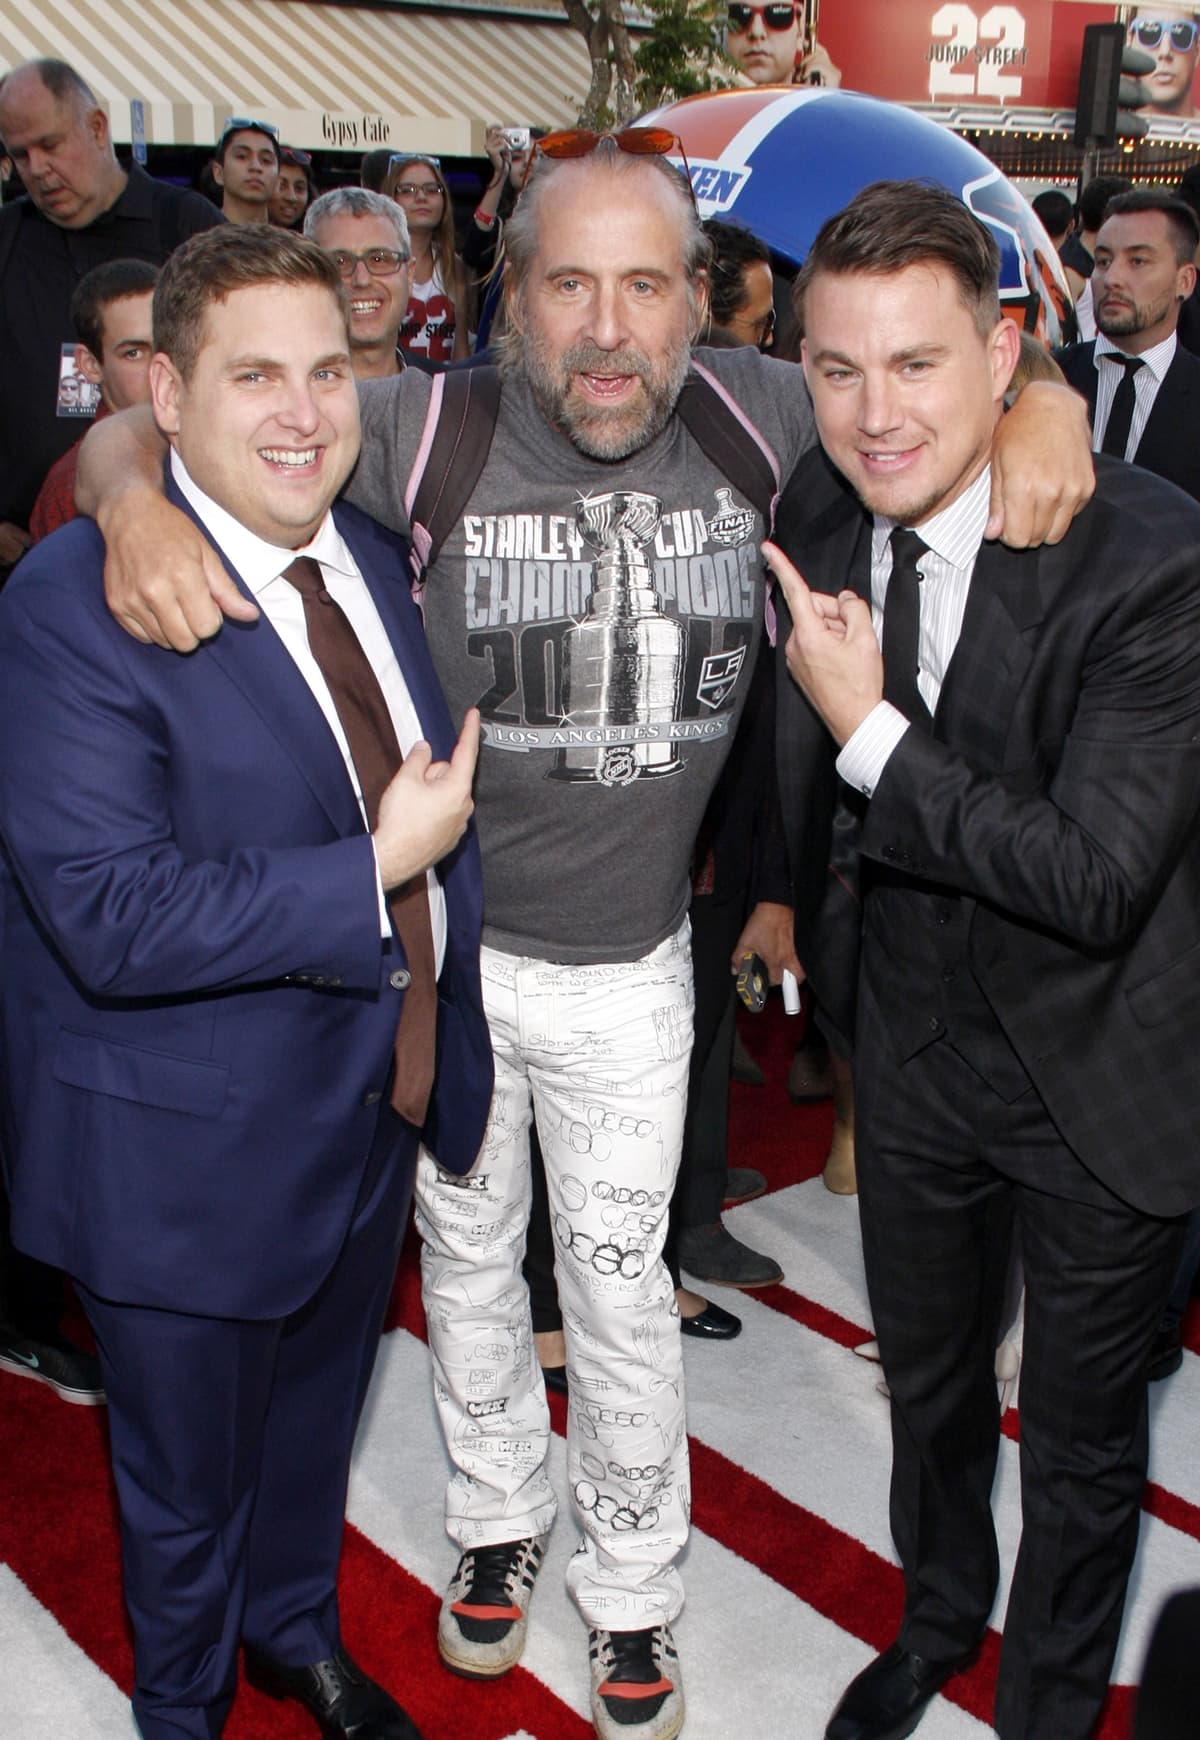 Peter Stormare, Channing Tatum, and Jonah Hill arrive at the Los Angeles premiere of 22 Jump Street